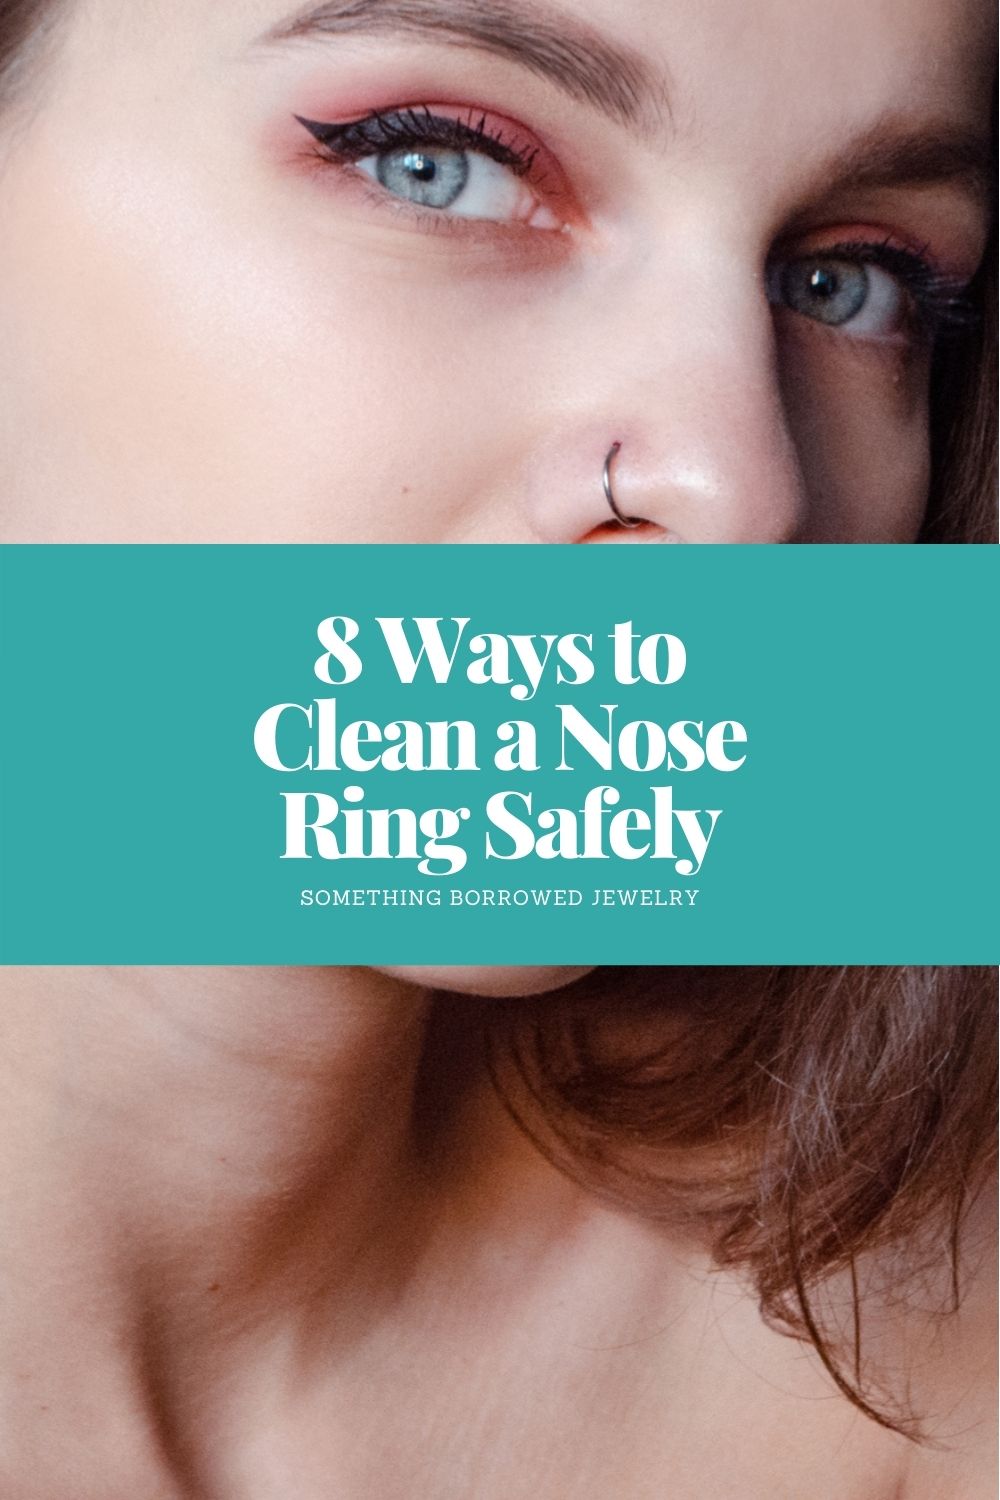 8 Ways to Clean a Nose Ring Safely pin 2